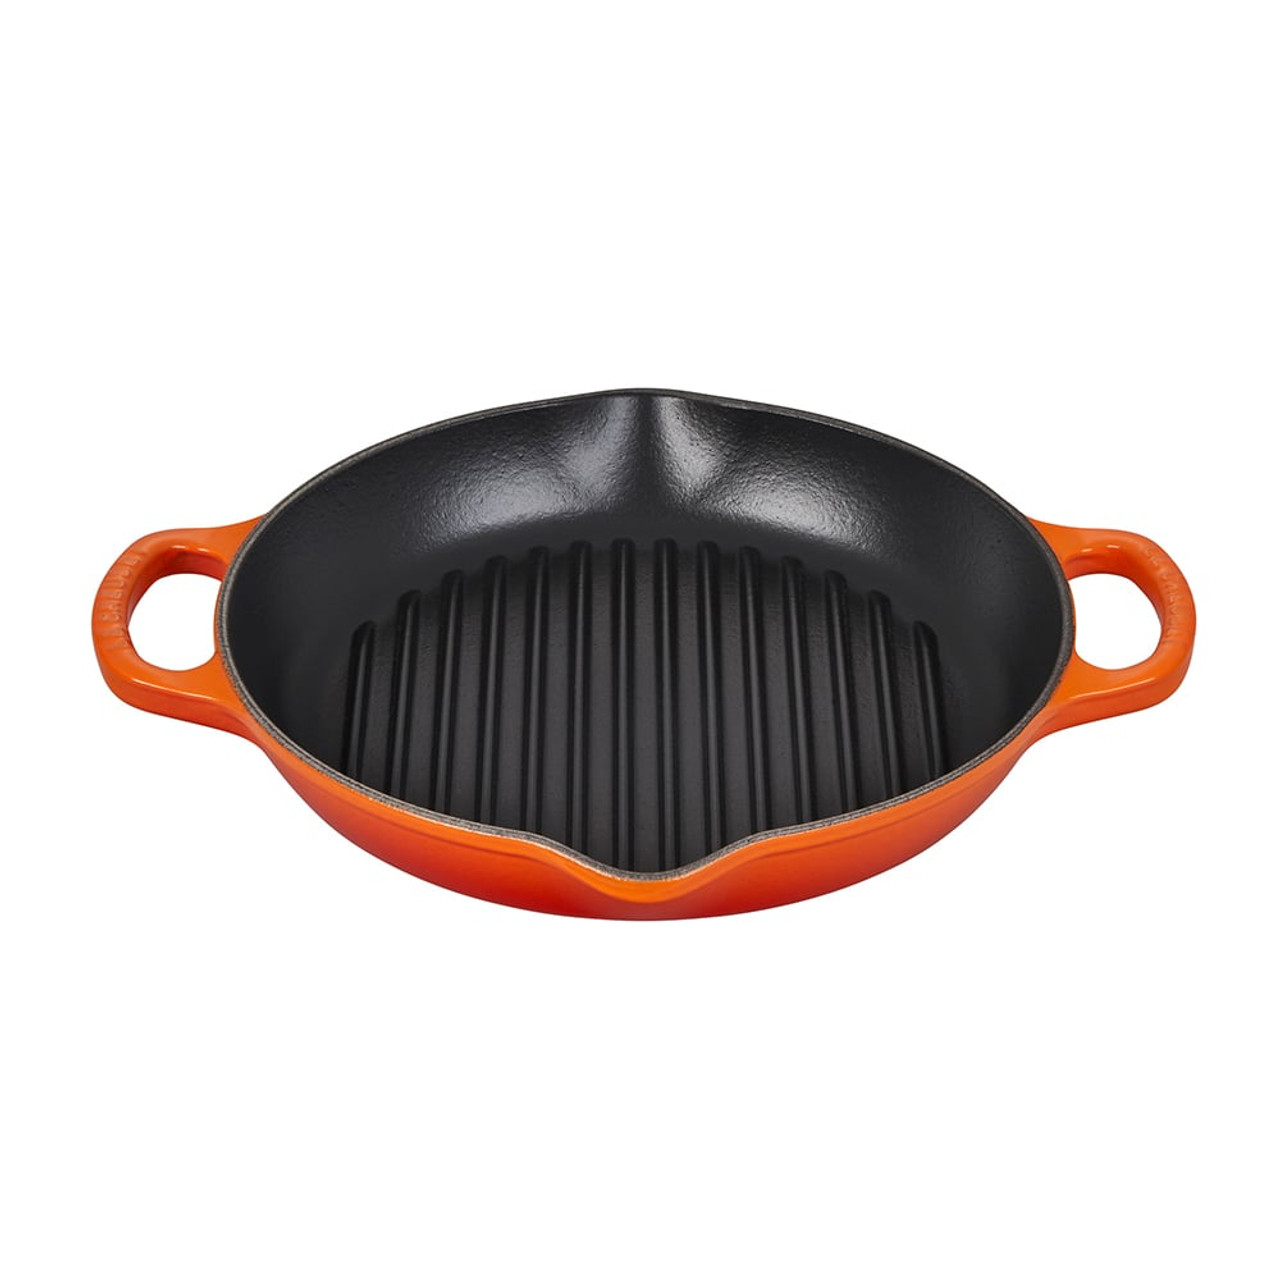 https://cdn11.bigcommerce.com/s-hccytny0od/images/stencil/1280x1280/products/3413/12284/le-creuset-signature-deep-round-grill-flame__05577.1662067654.jpg?c=2?imbypass=on